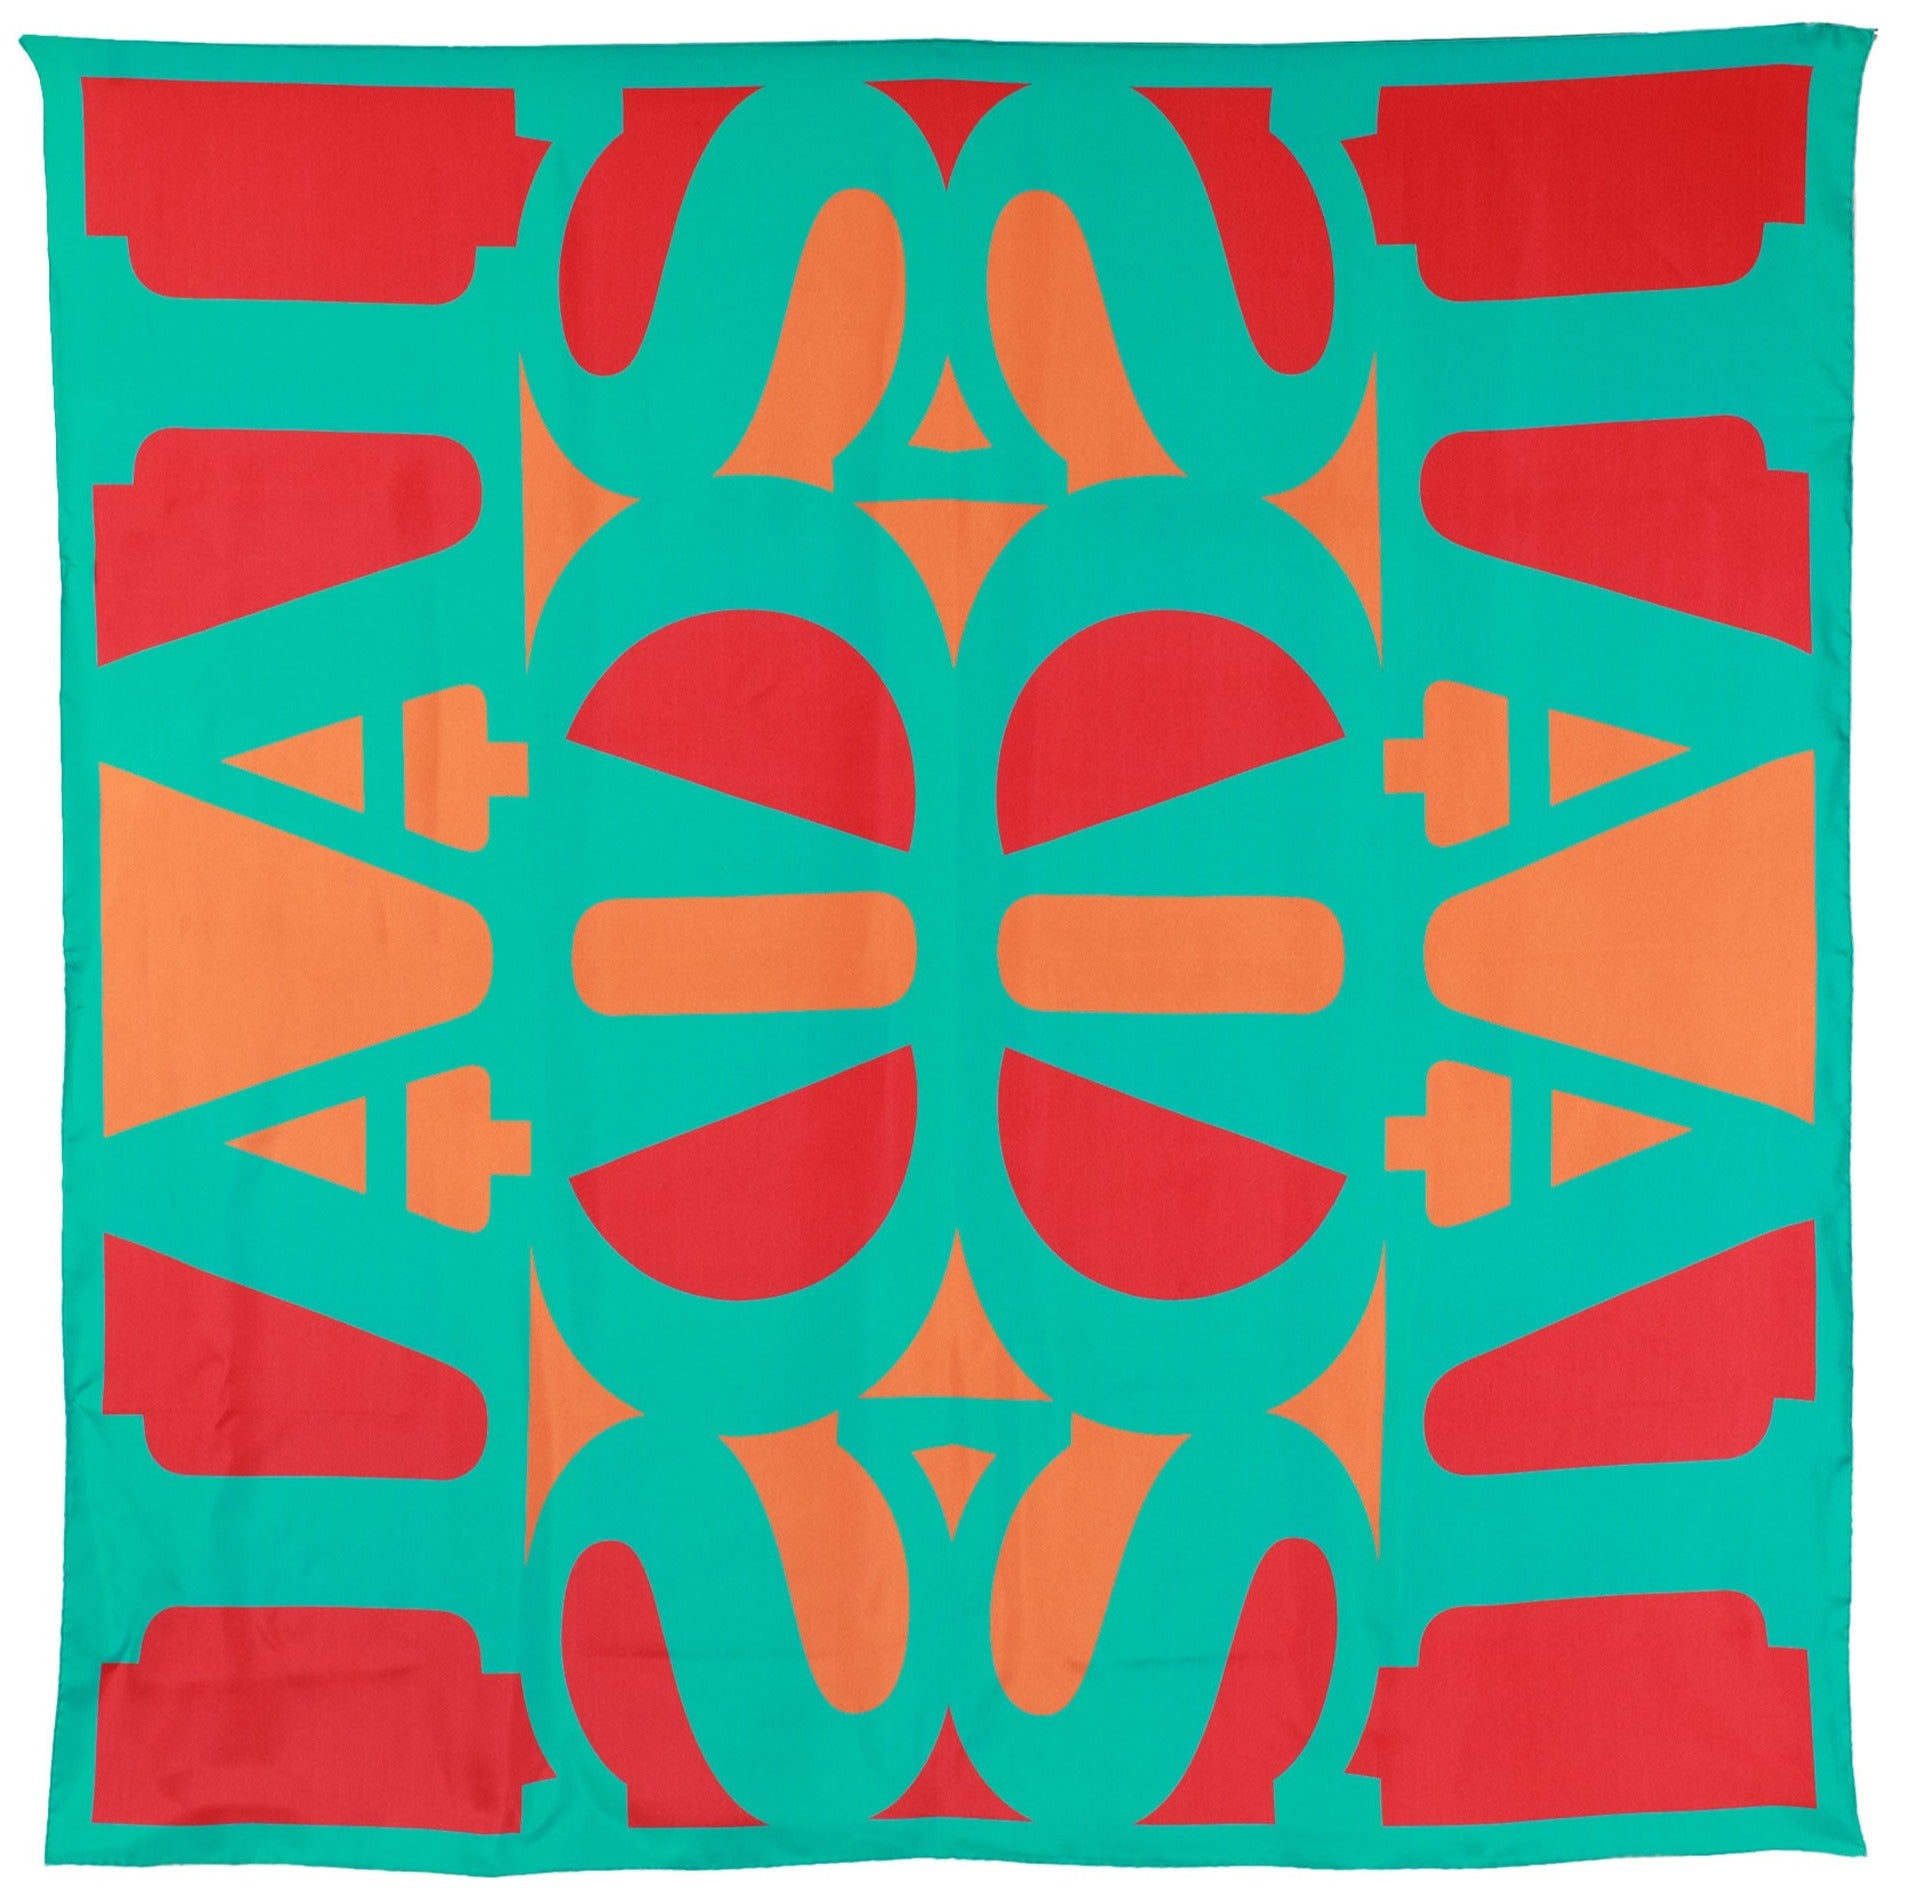 A straight-on view of the Great AIDS scarf unfolded. There is a tesseilating pattern spelling out the word "AIDS" that repeats four times. In the middle of the scarf the "D" letters converge to create an abstract image of a butterfly. 